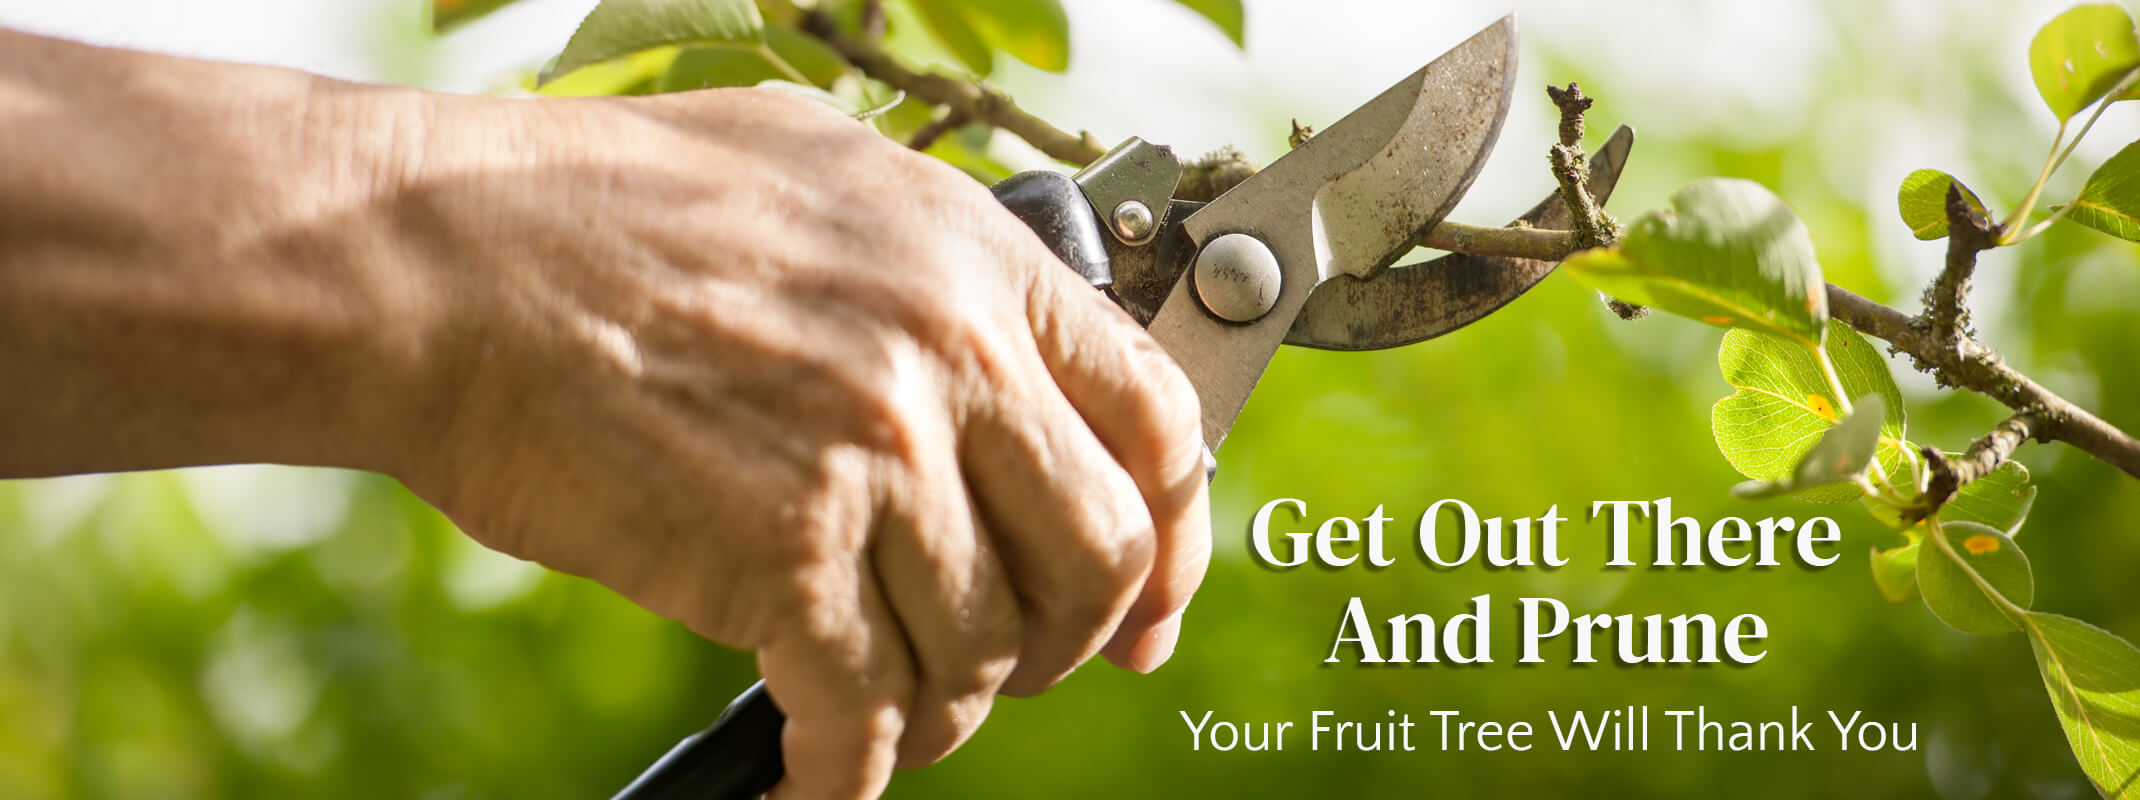 a person holding a pair of  bypass pruners about to snip off a branch on a fruit tree with the words: Get out there and prune - your fruit tree will thank you on the image